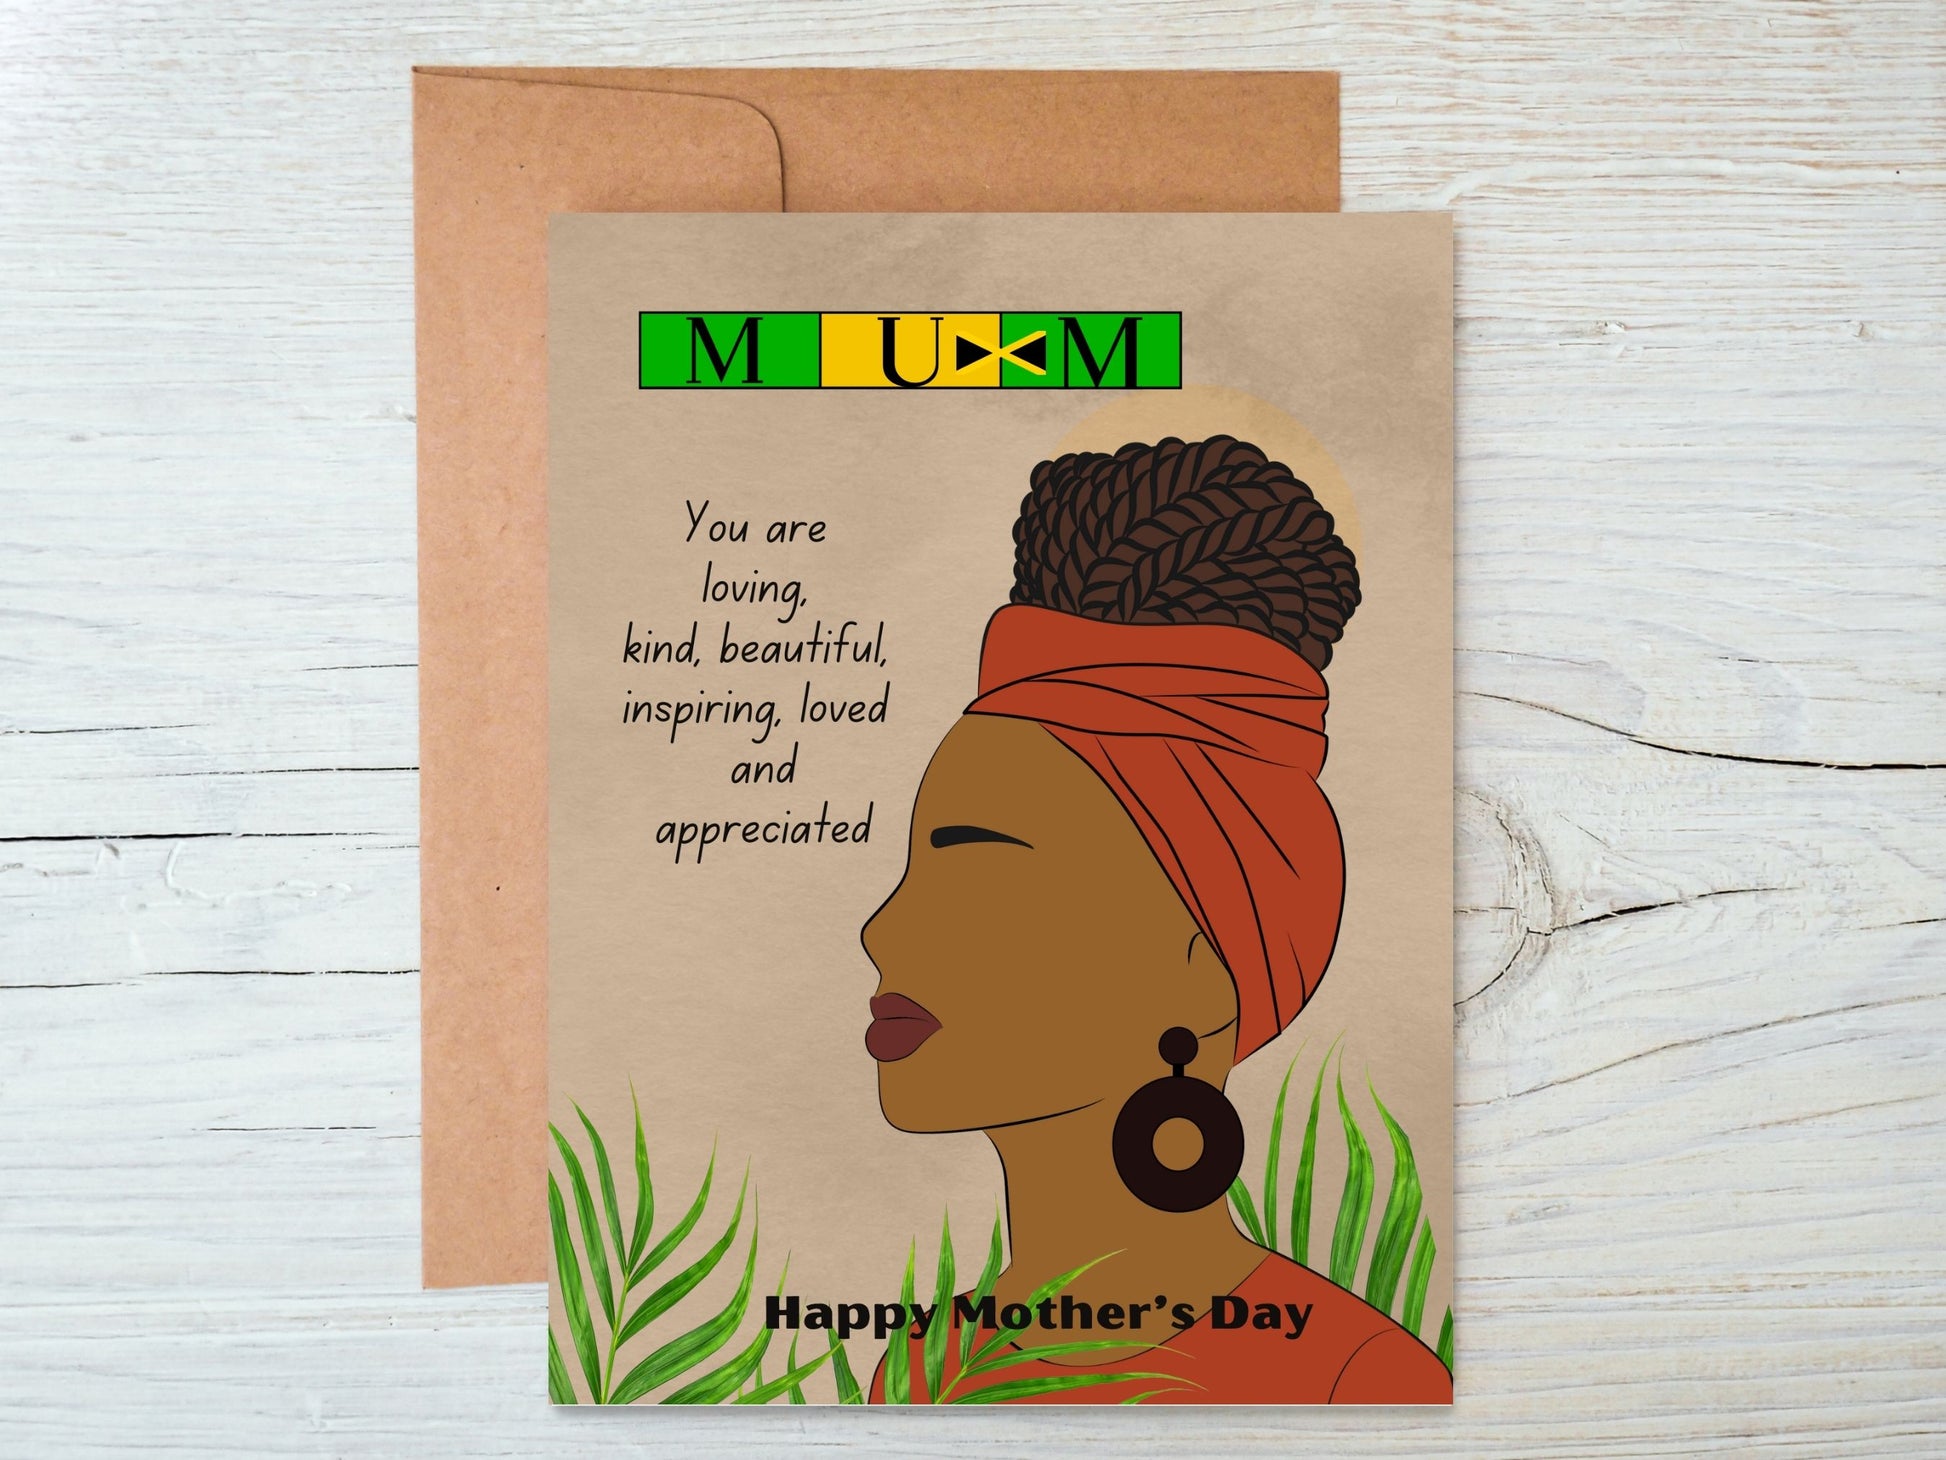 Black mothers Day cards for Jamaican mother